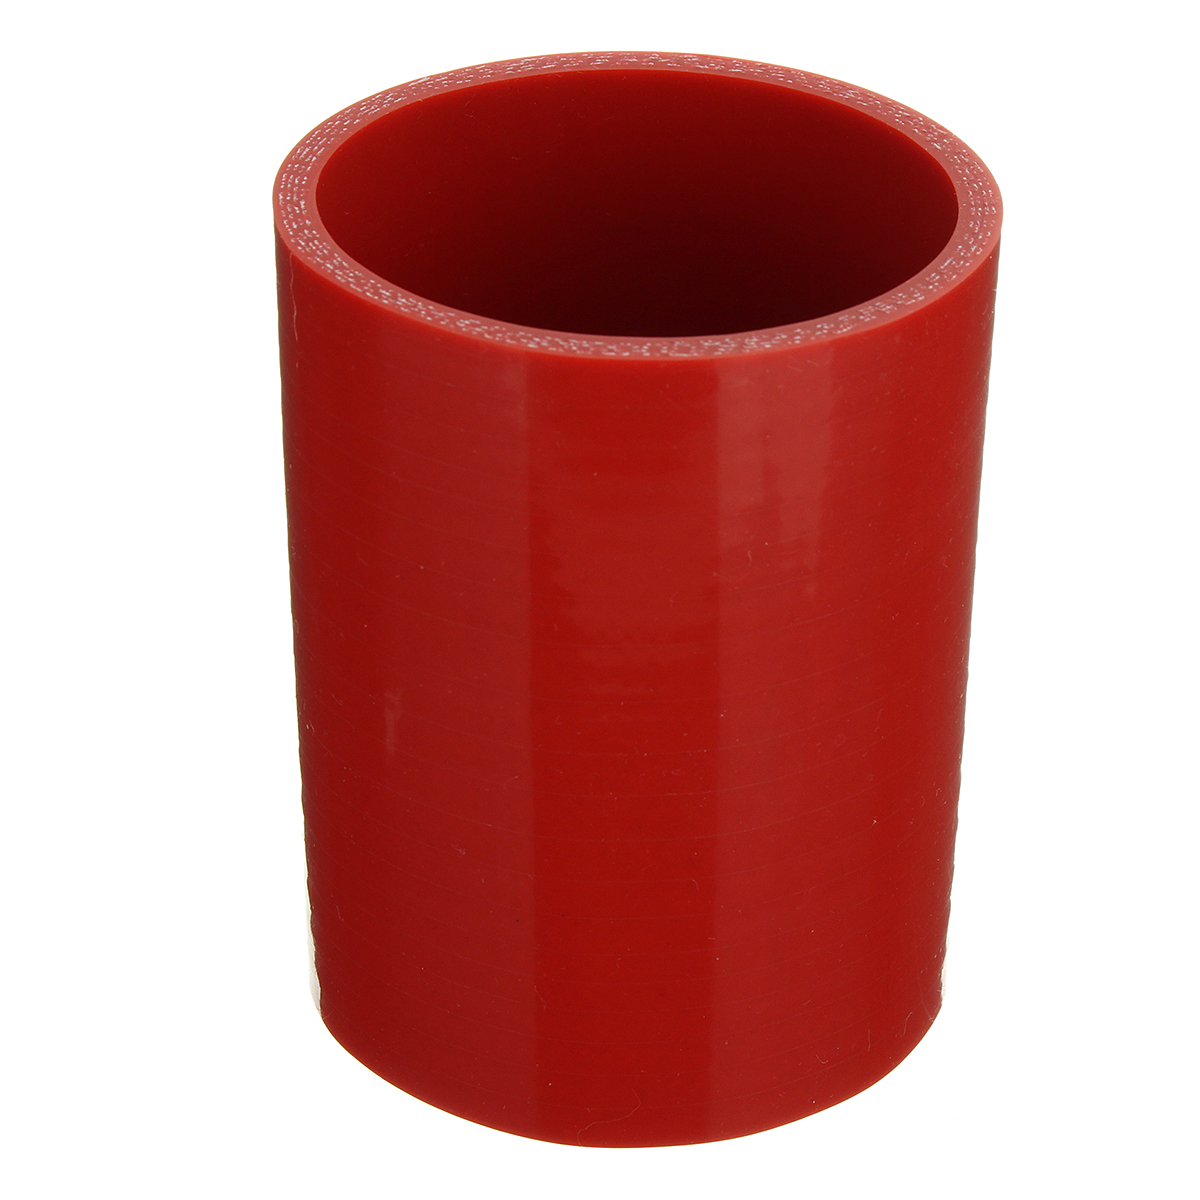 100mm-Straight-Silicone-Hose-Coupling-Connector-Silicon-Rubber-Tube-Joiner-Pipe-Ash-1619119-5